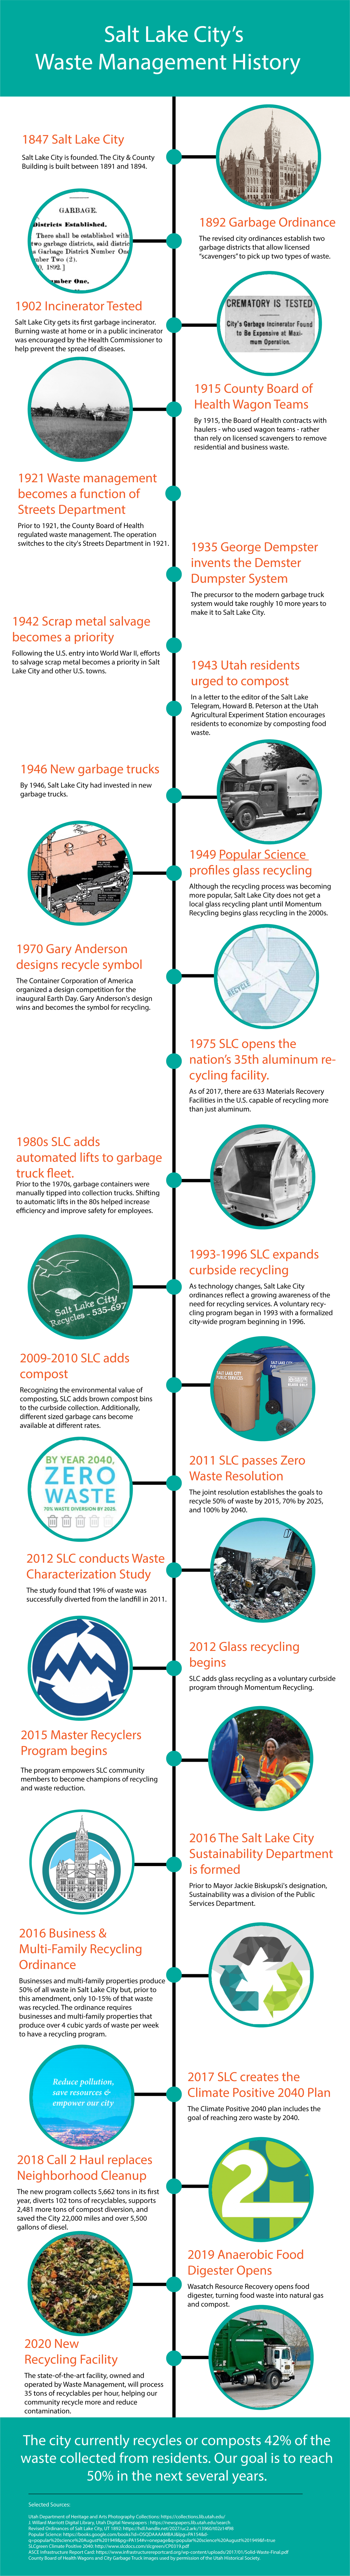 Graphic timeline of Salt Lake City's Waste Management History. Written description of the history is provided in the drop-down menu below the graphic. 